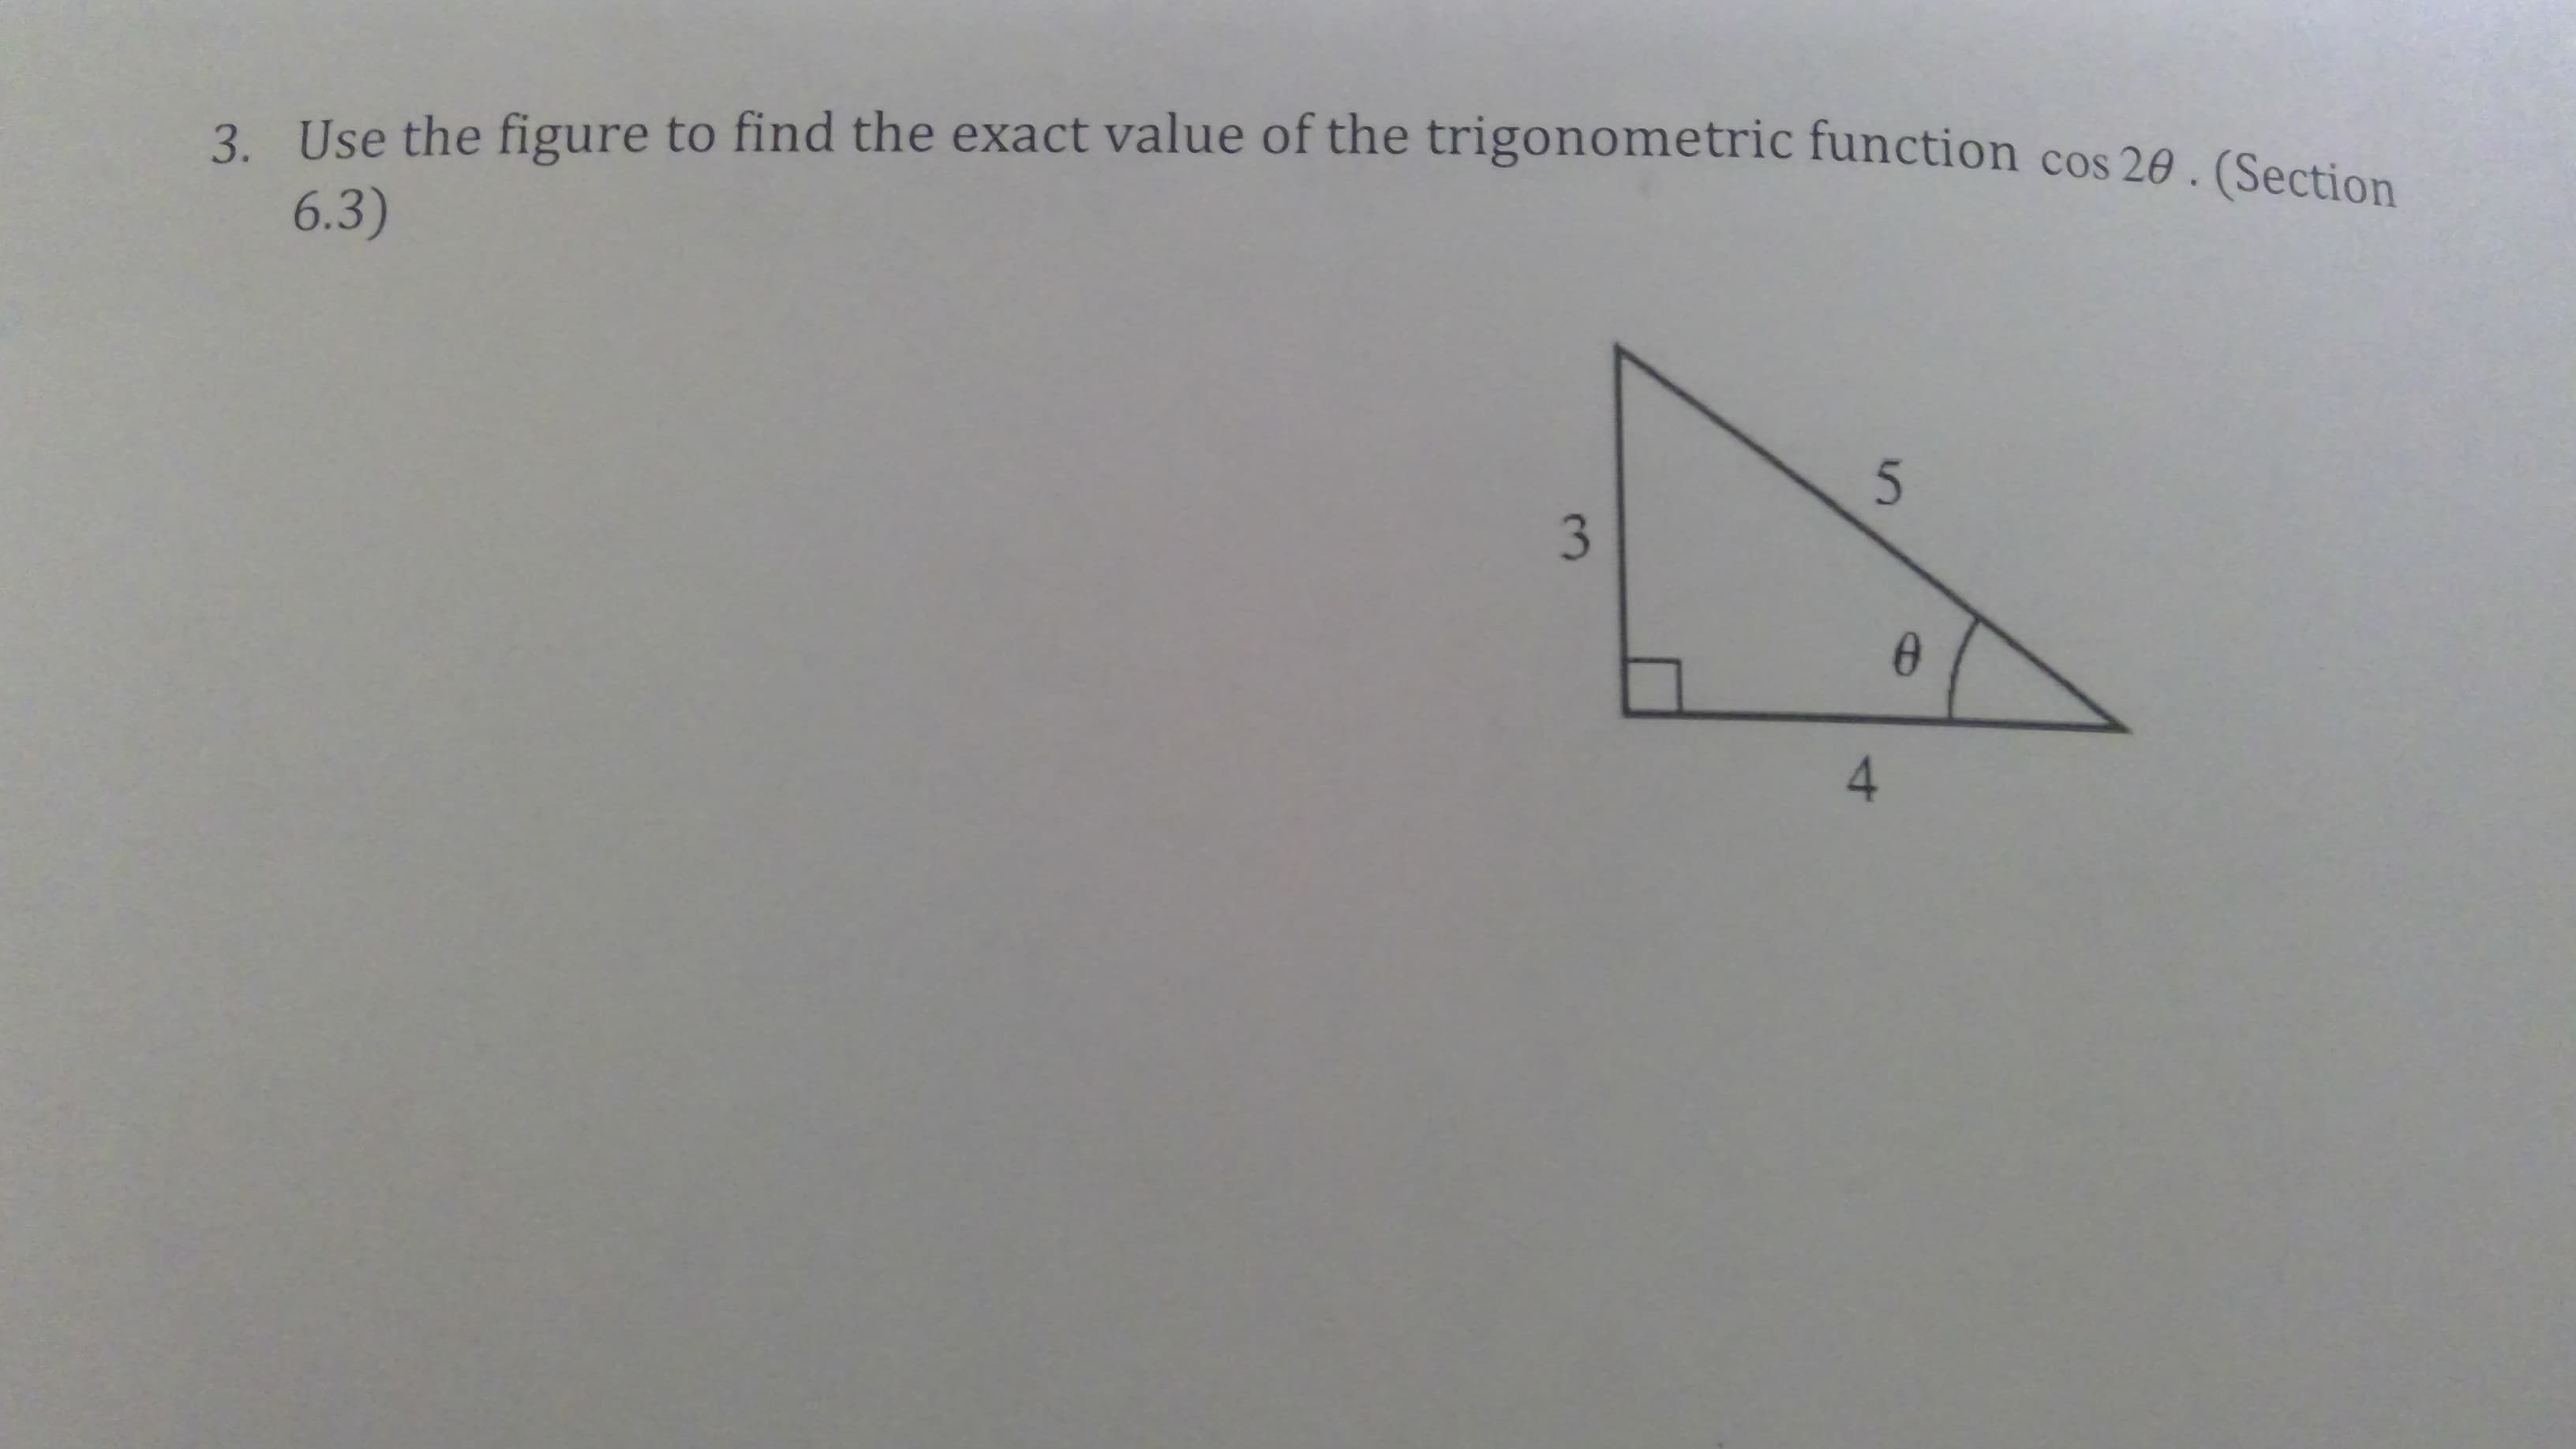 3. Use the figure to find the exact value of the trigonometric function cos 20. (Section
6.3)
3.
5.
4
